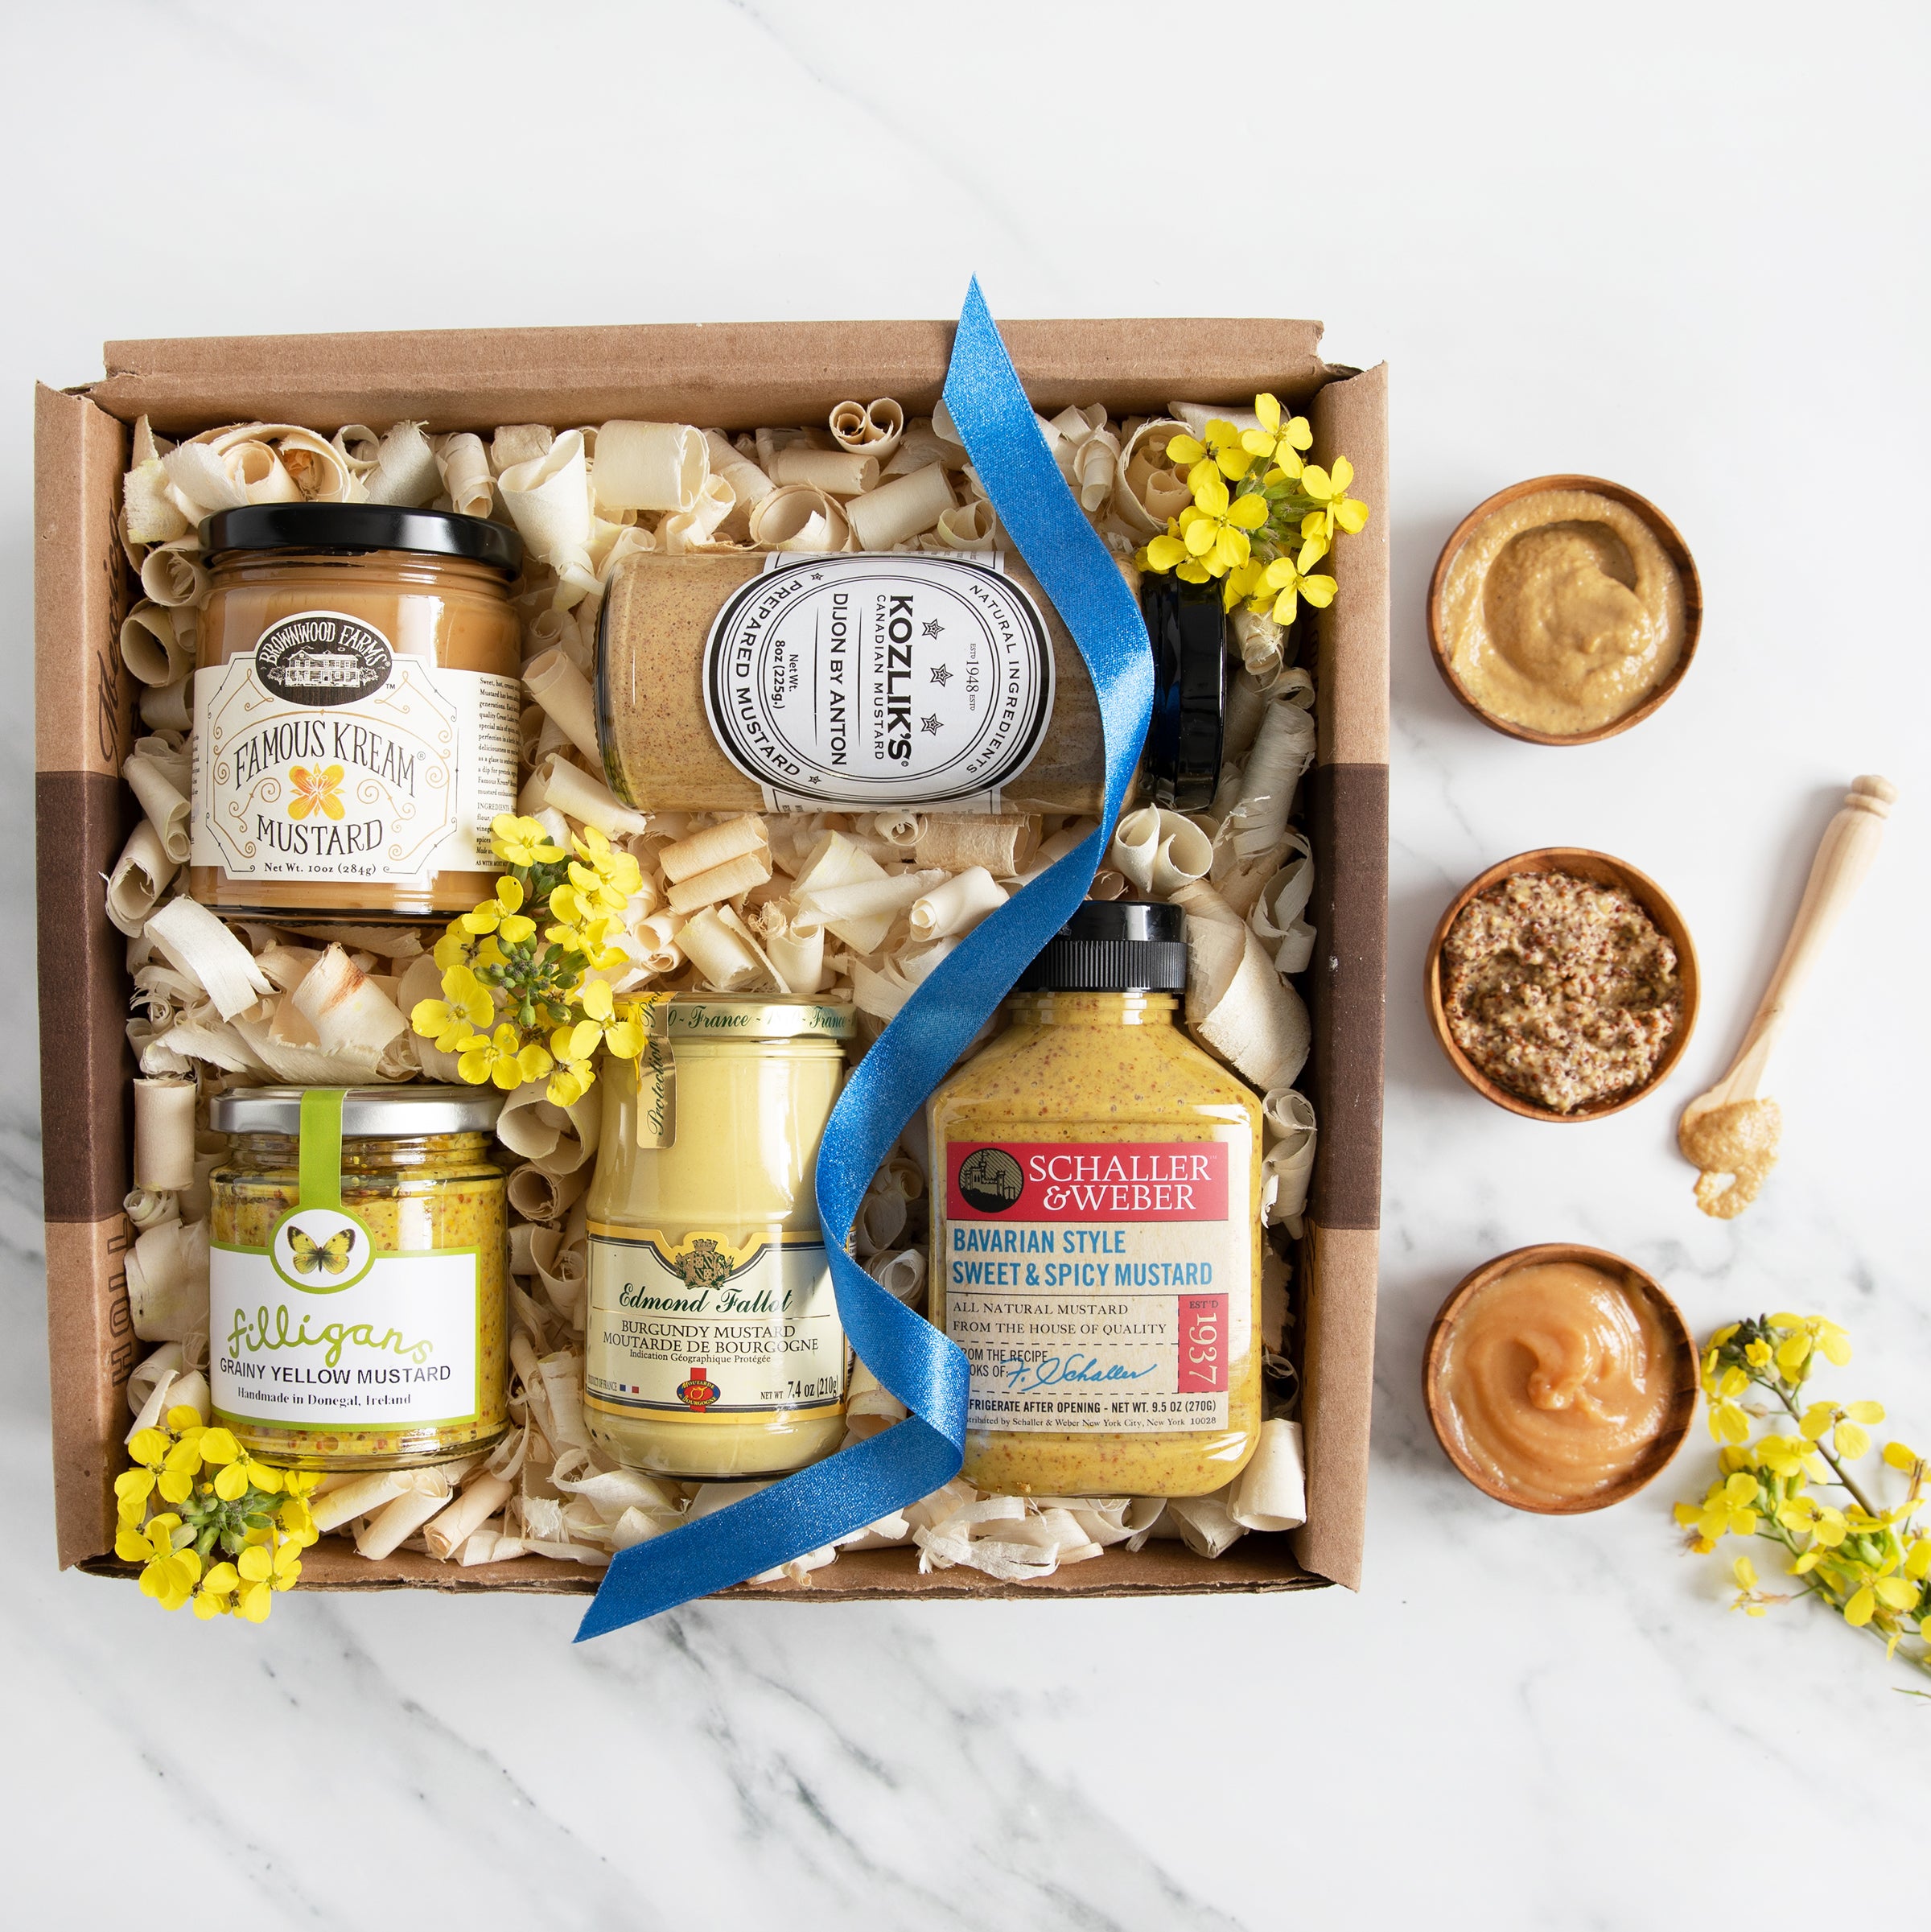 Euro Food Depot - Gift Box Gourmet 7 items - French Gourmet Food